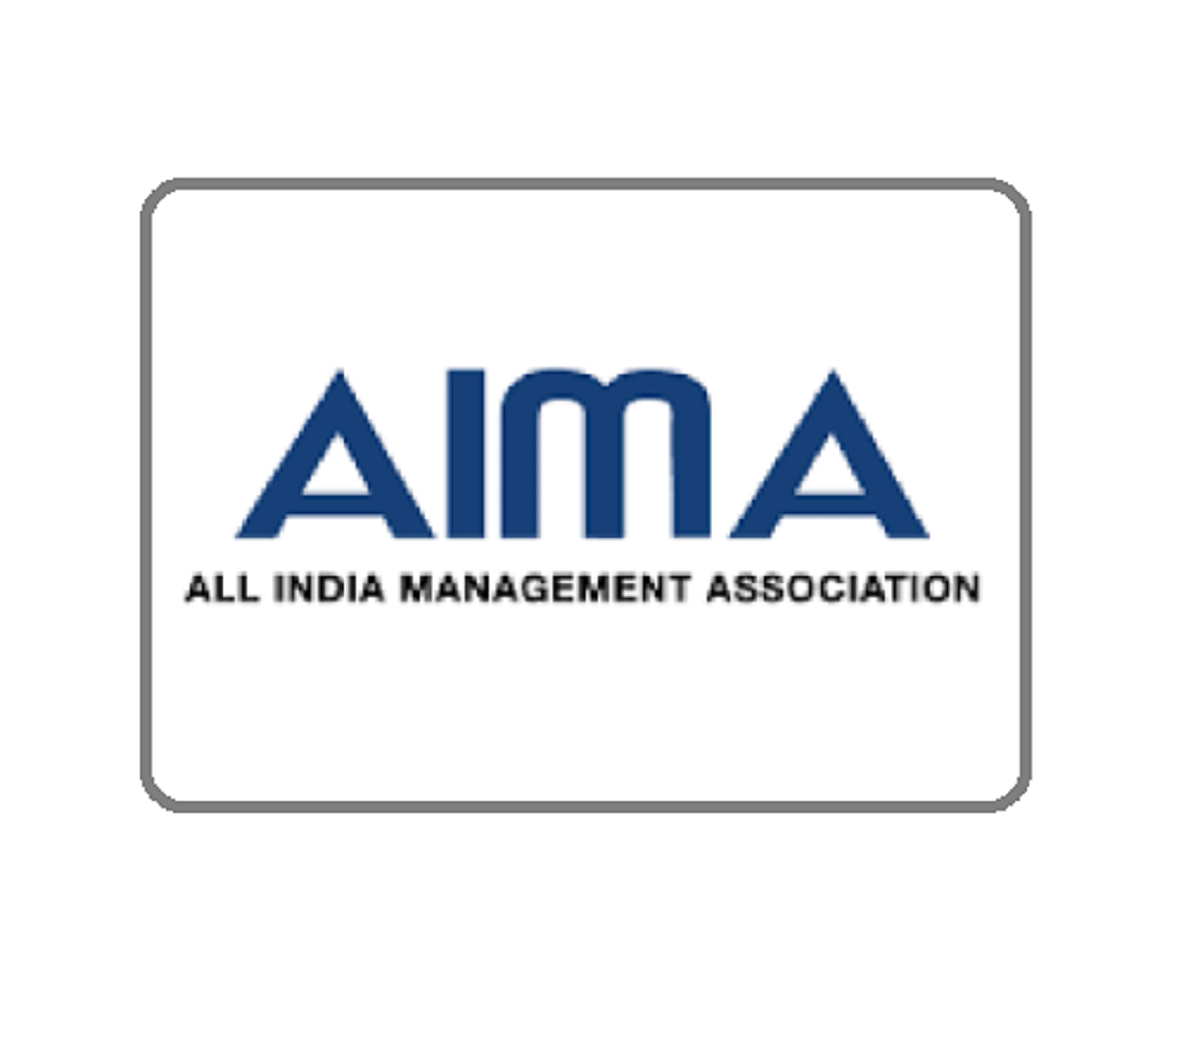 AIMA MAT IBT 2020 September Session Admit Card Released, Download Now